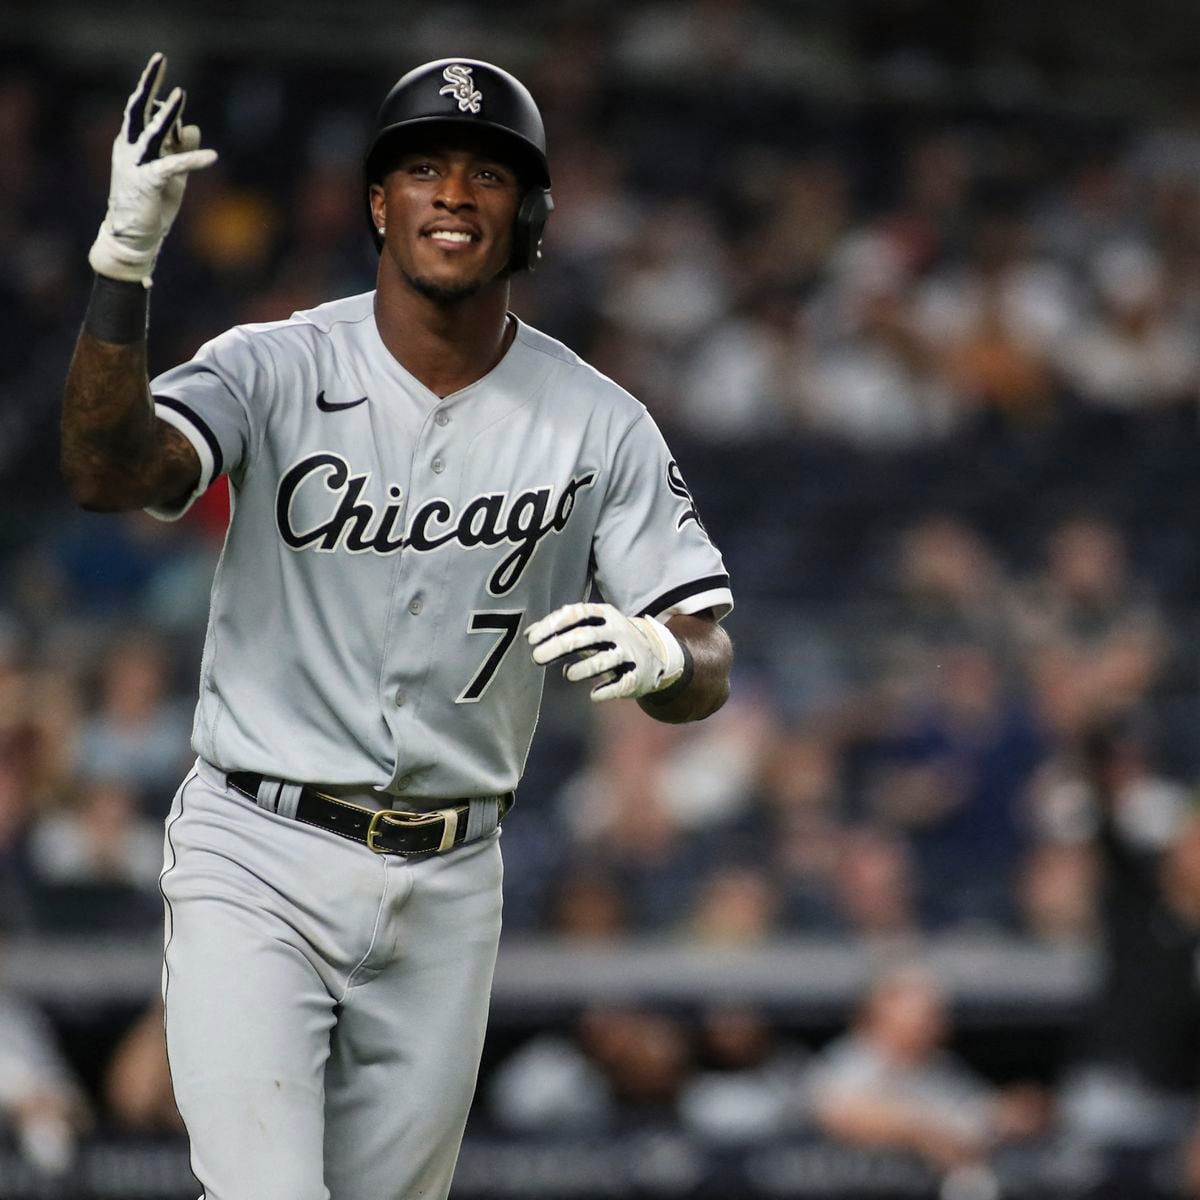 Meet the All-Stars: Meet and Greet with 2019 White Sox All-Stars